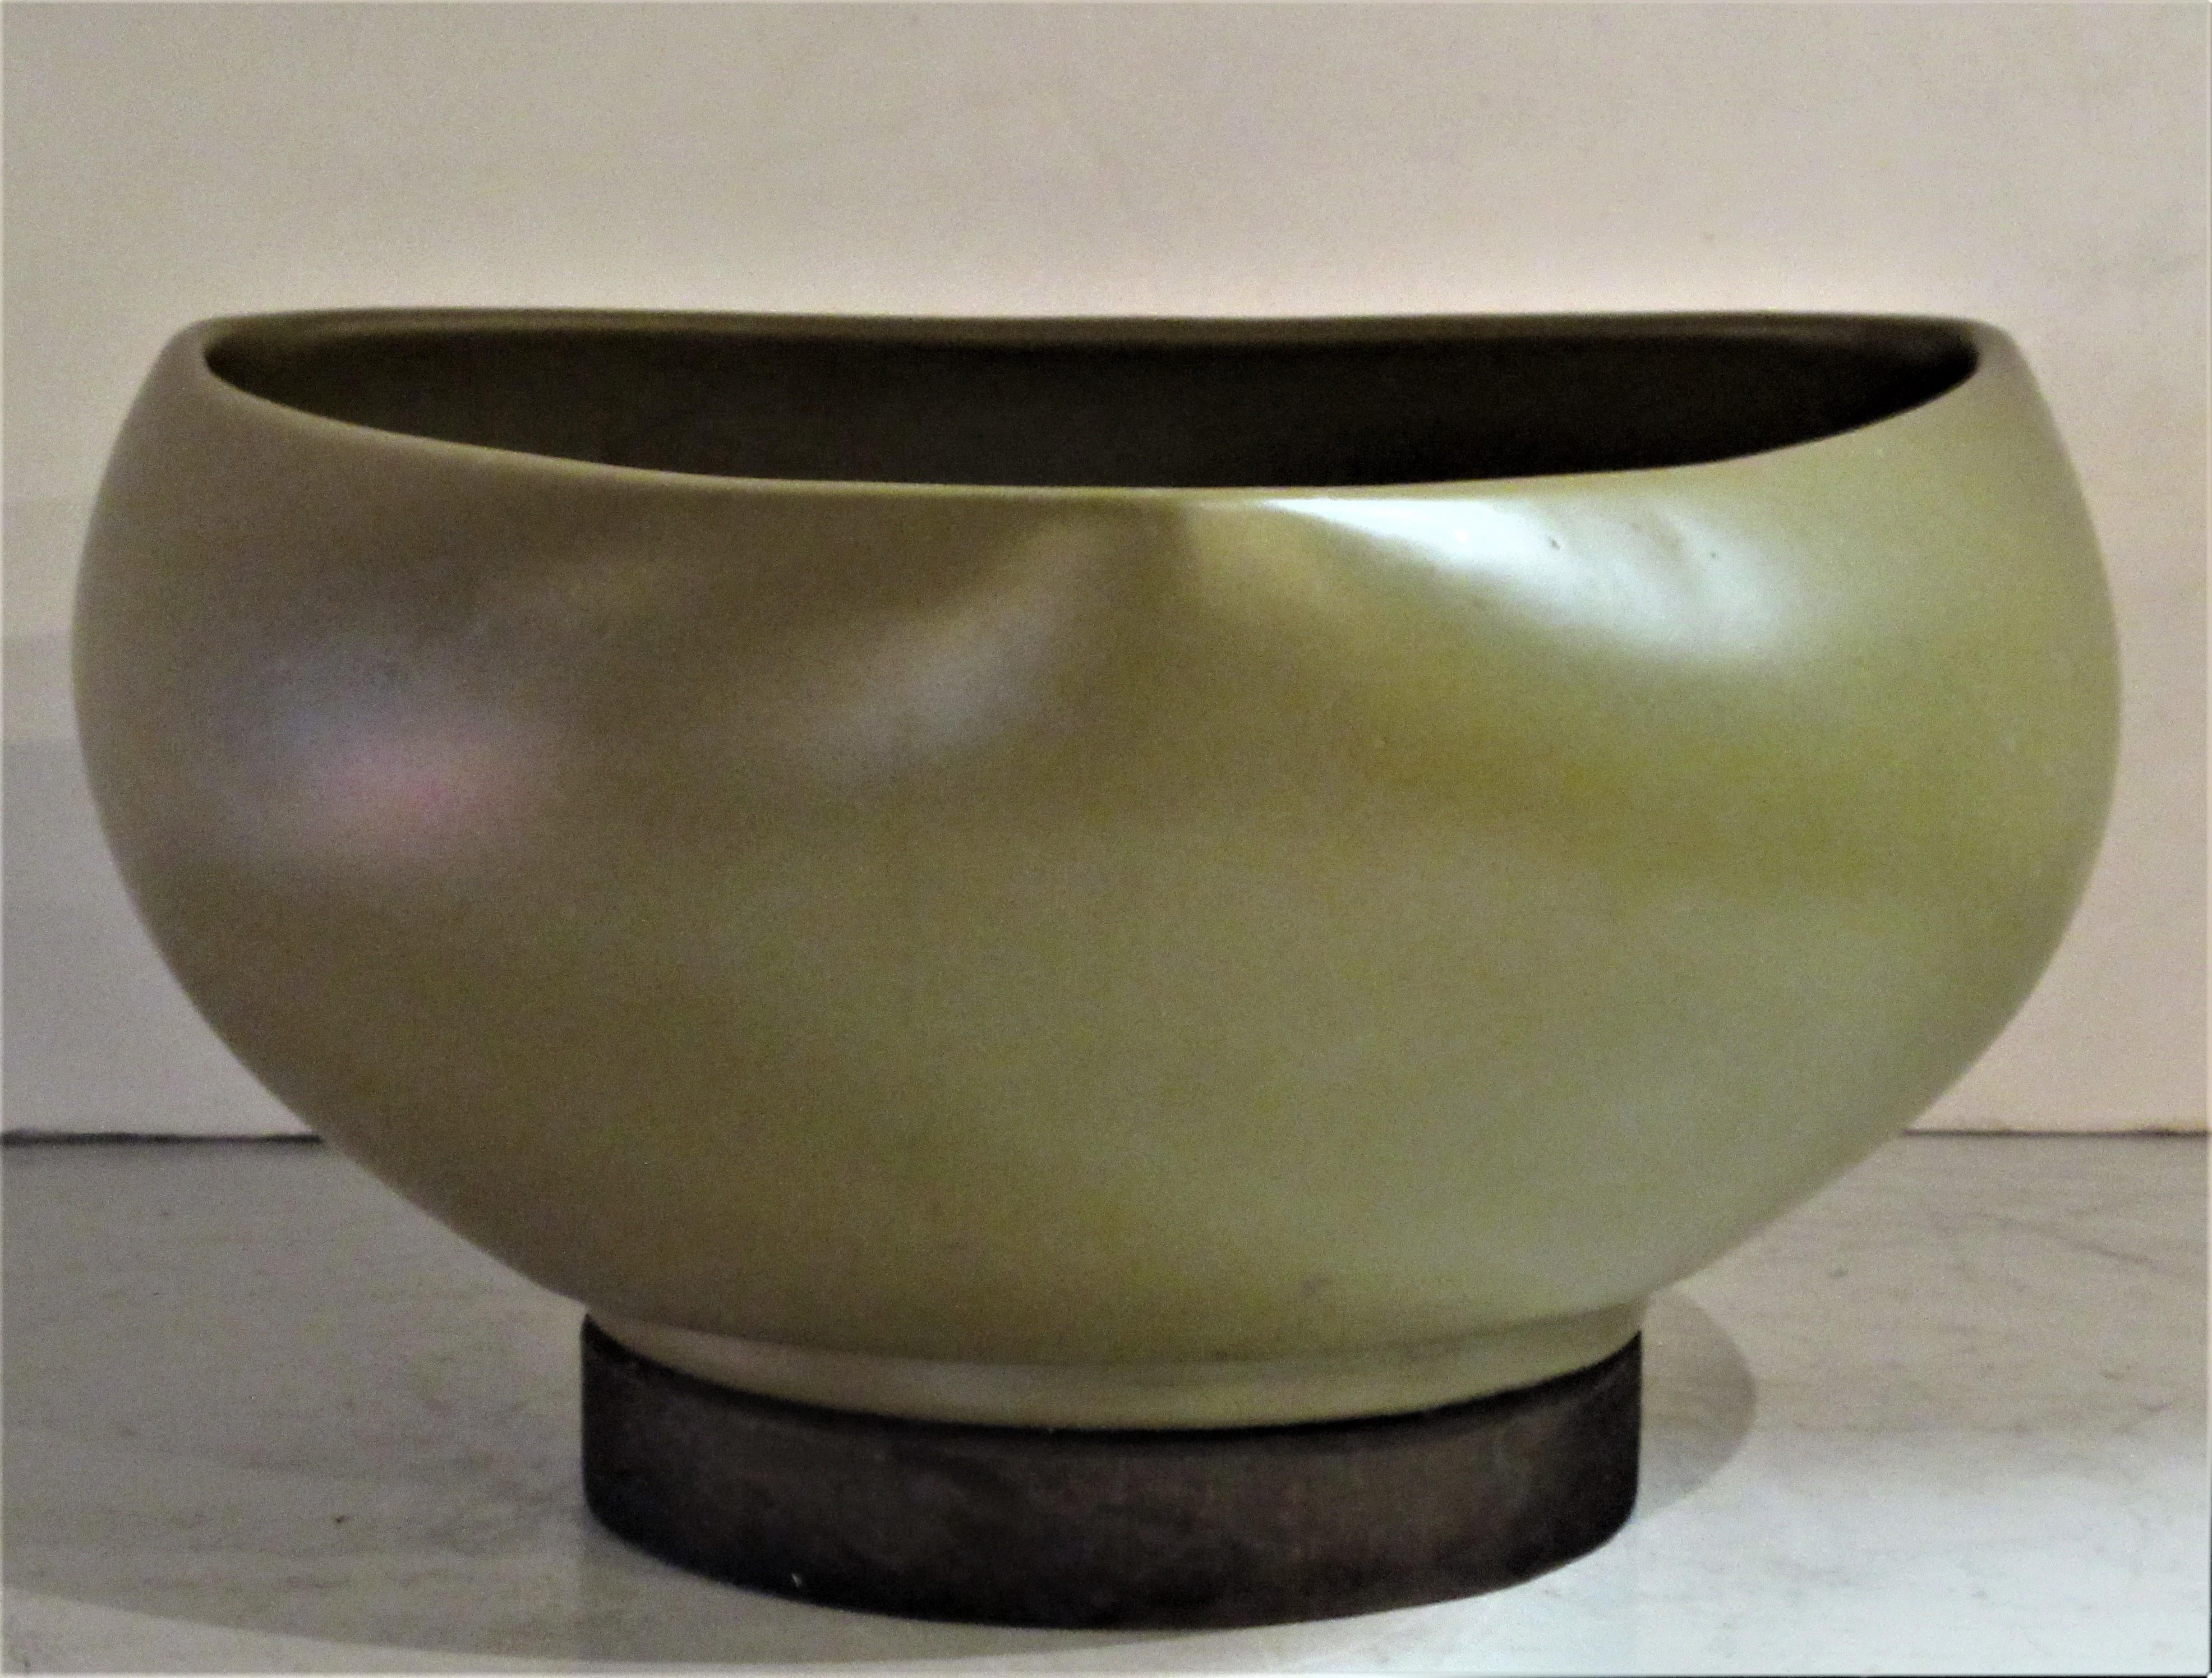 Rich pea color satin glazed architectural pottery planter with a symmetrical rounded spade shape form mounted on circular wood disc base by John Follis for Architectural Pottery, California, circa 1960.